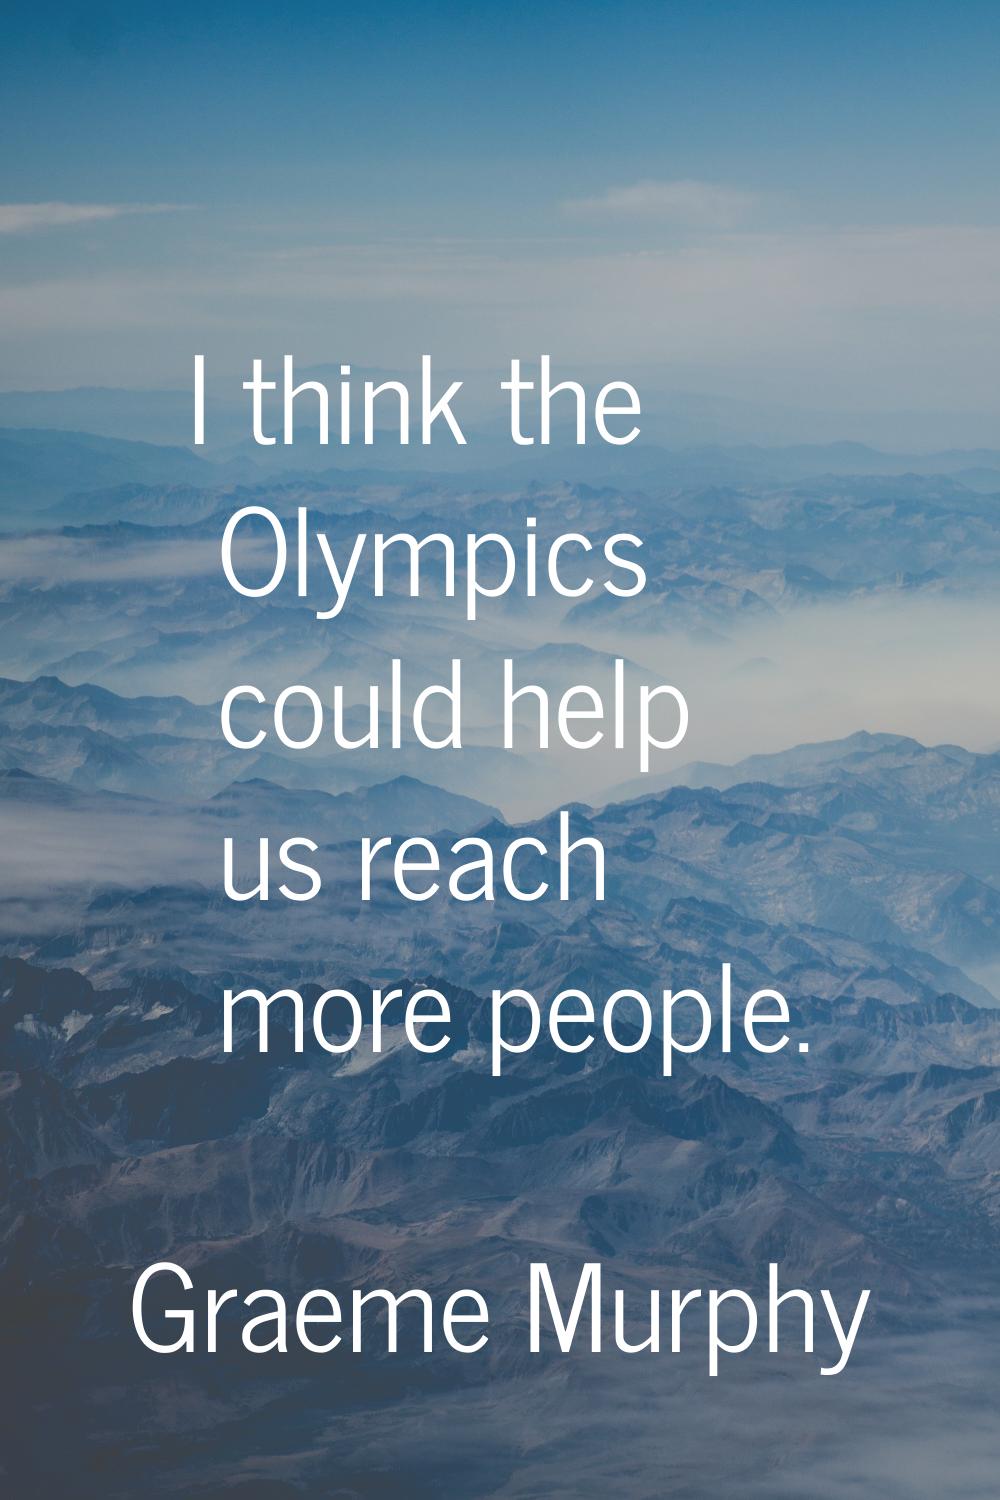 I think the Olympics could help us reach more people.